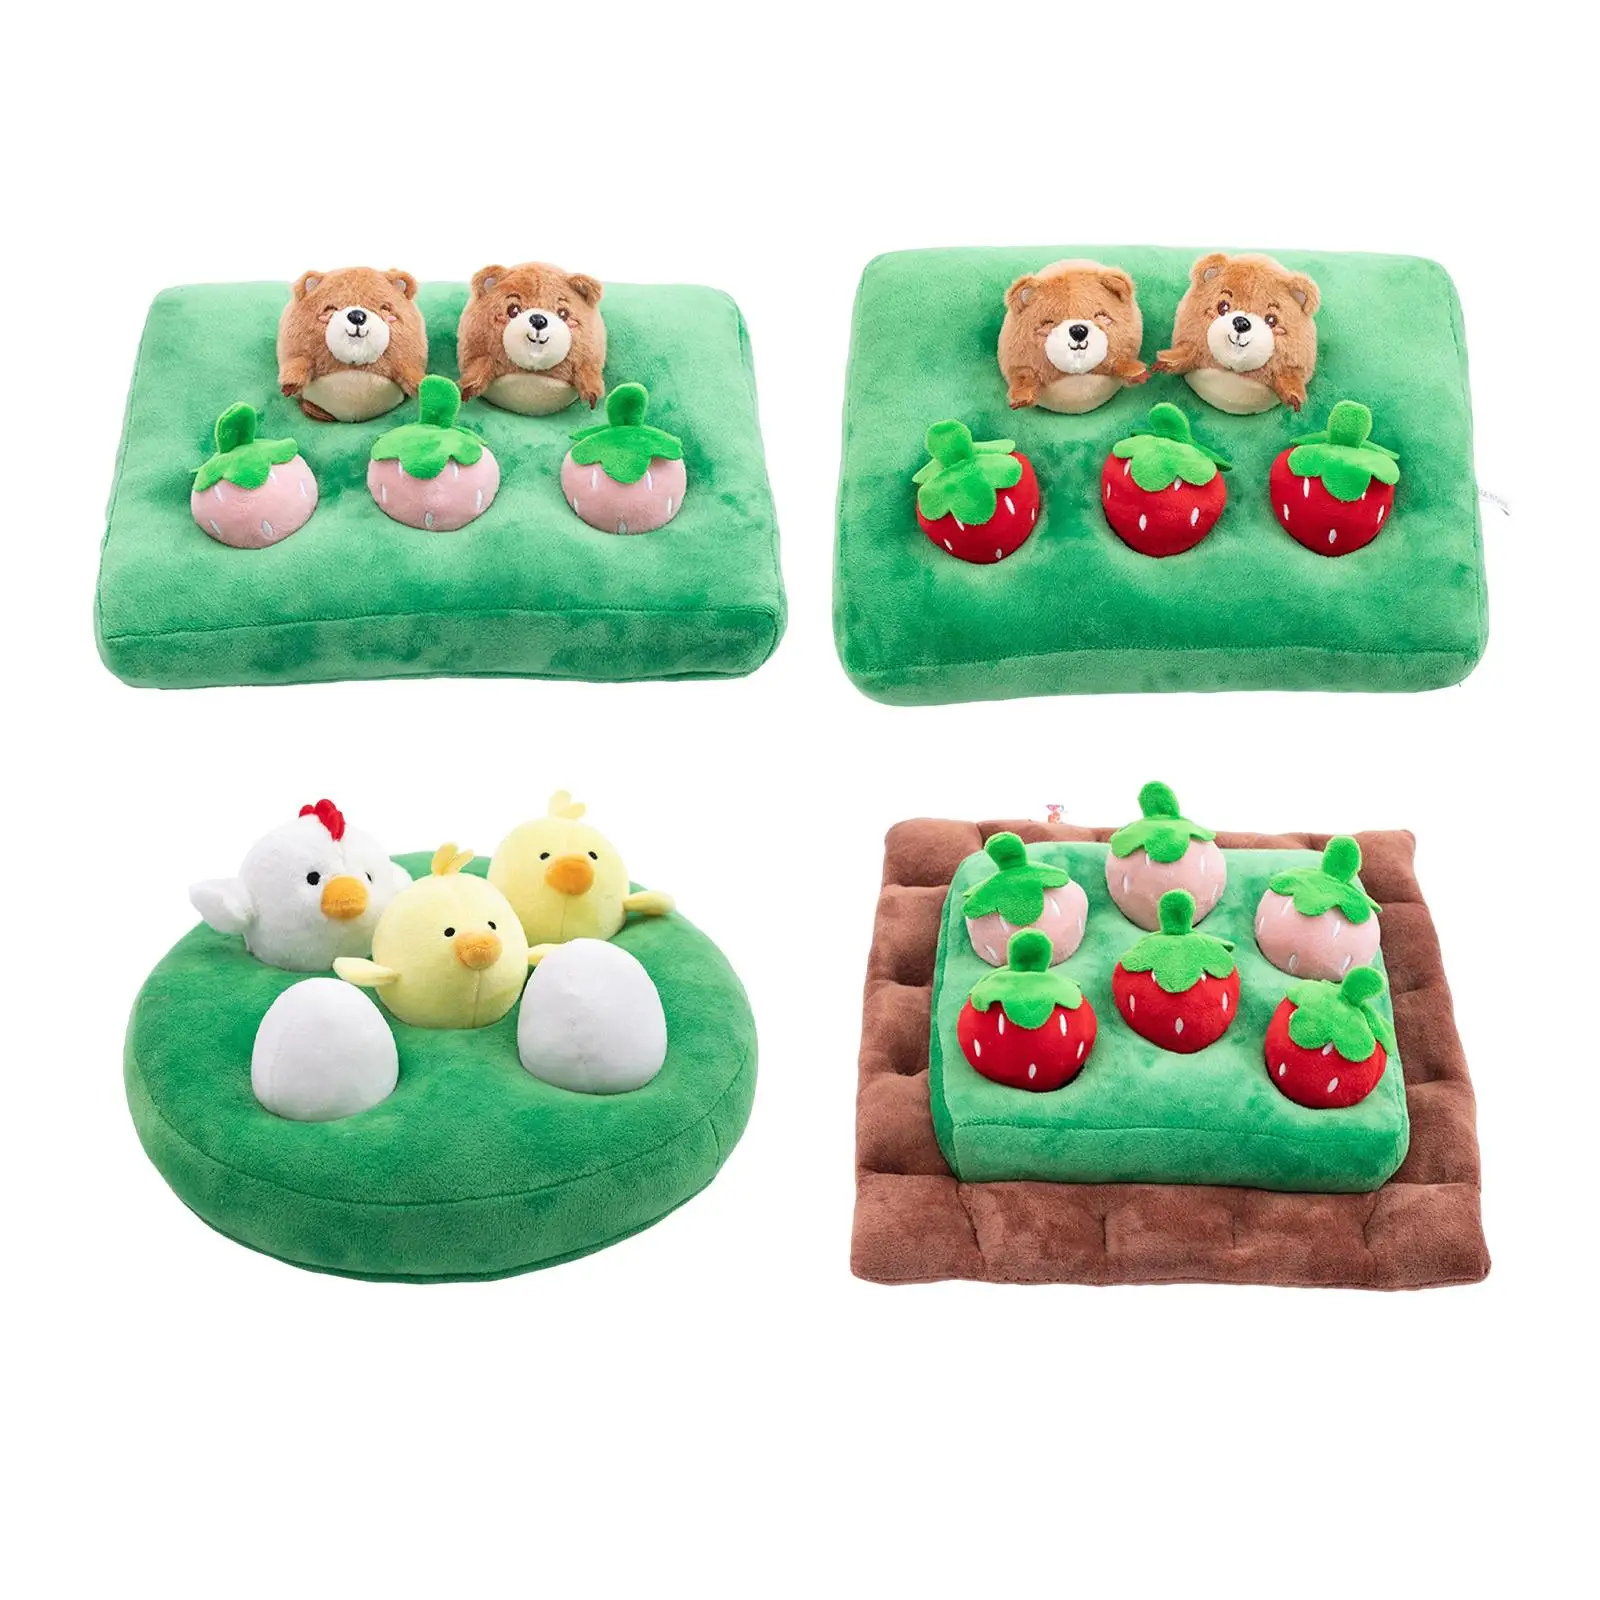 Puzzle Toys Educational Learning Toys Games Soft Stuffed Interactive Sorting Playset Funny Plush Toy for Birthday Gift Children